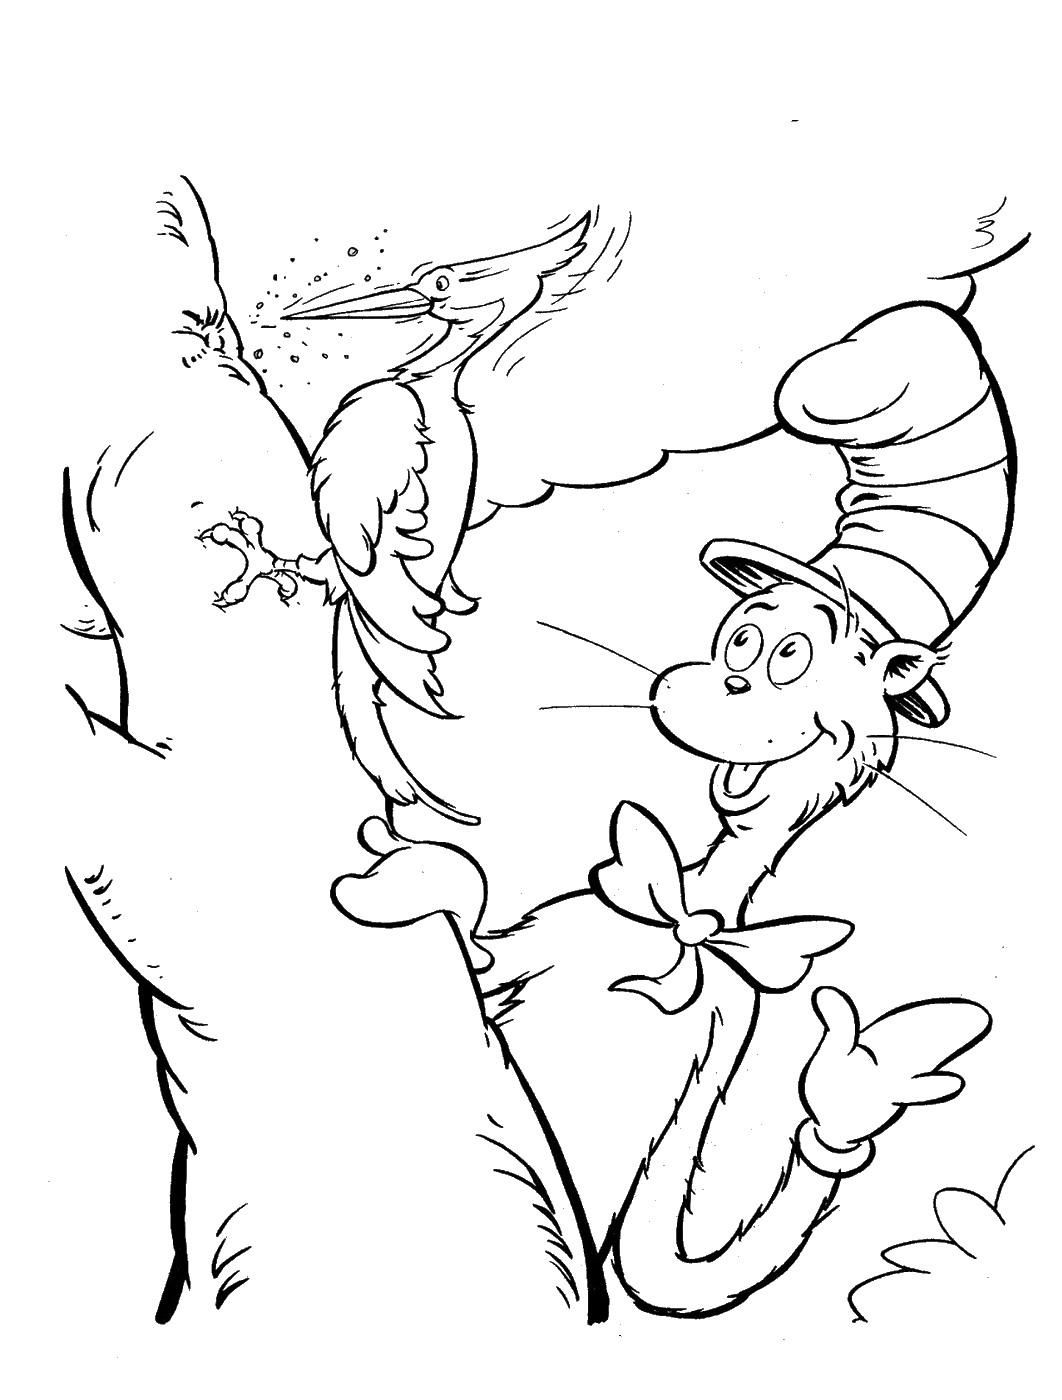 The Cat In The Hat Coloring Pages | Coloring Pages